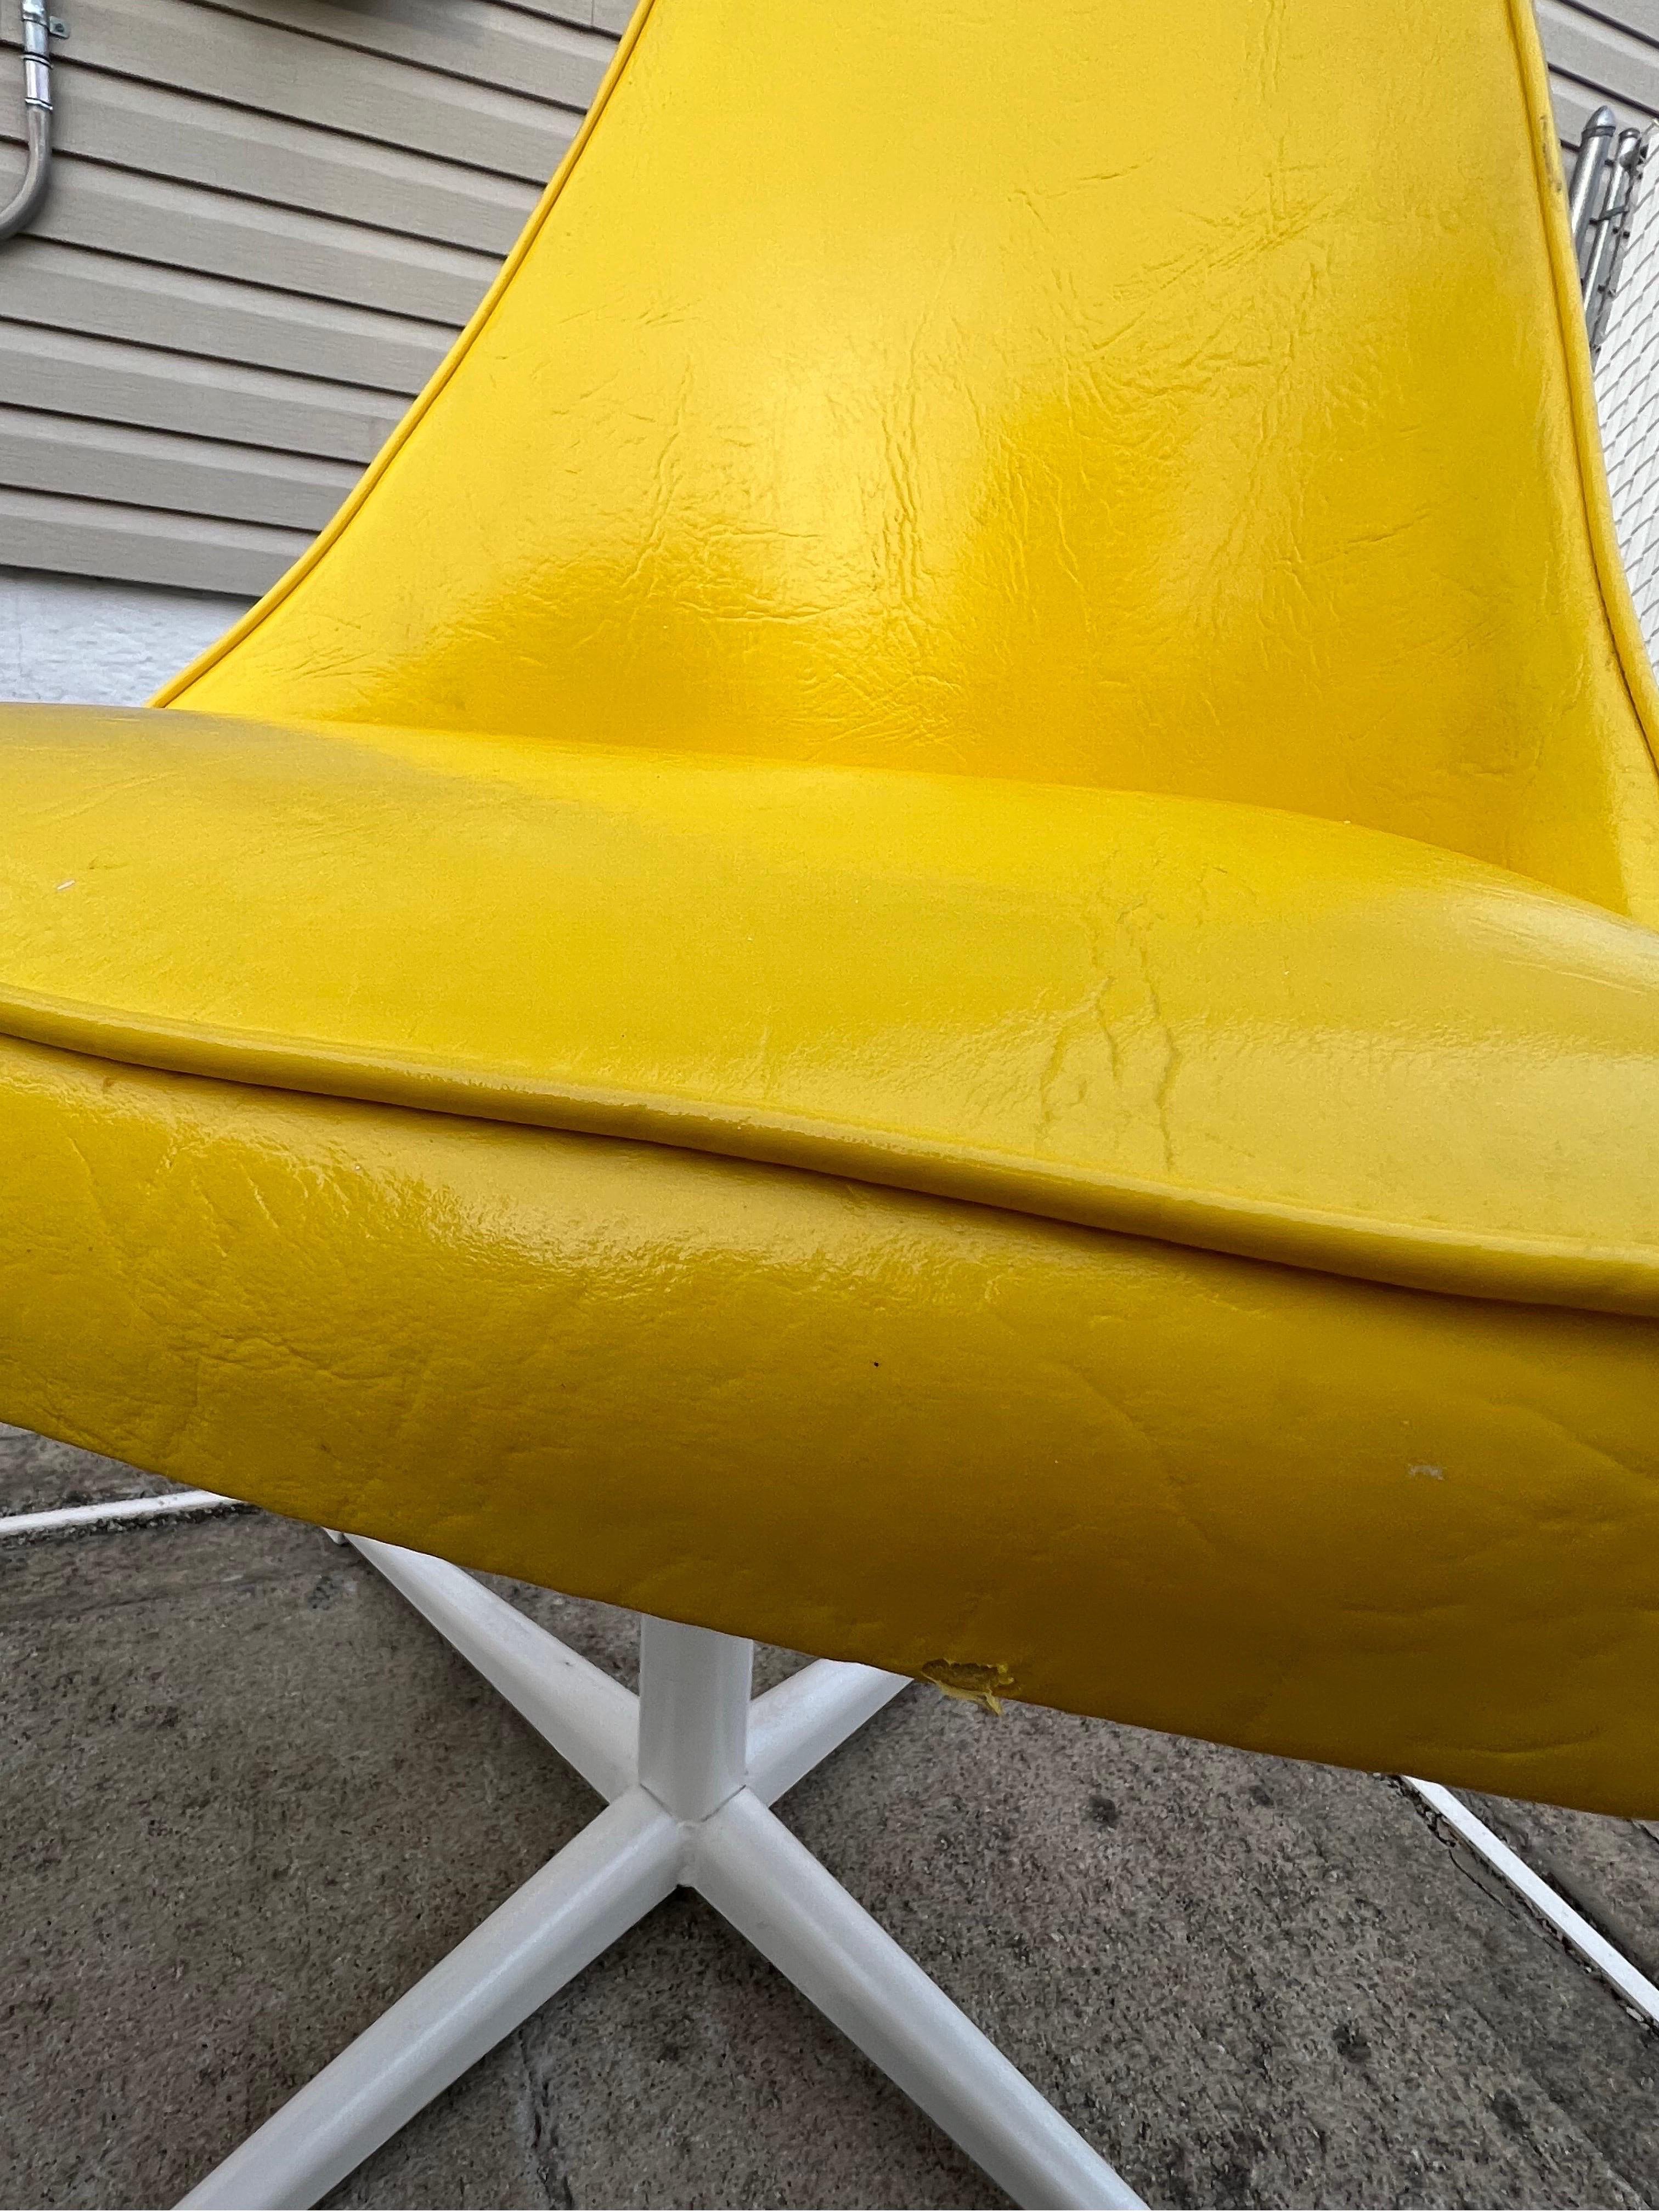 Metal 1970 Yellow Vinyl Dining Chairs, a Set of 4 For Sale